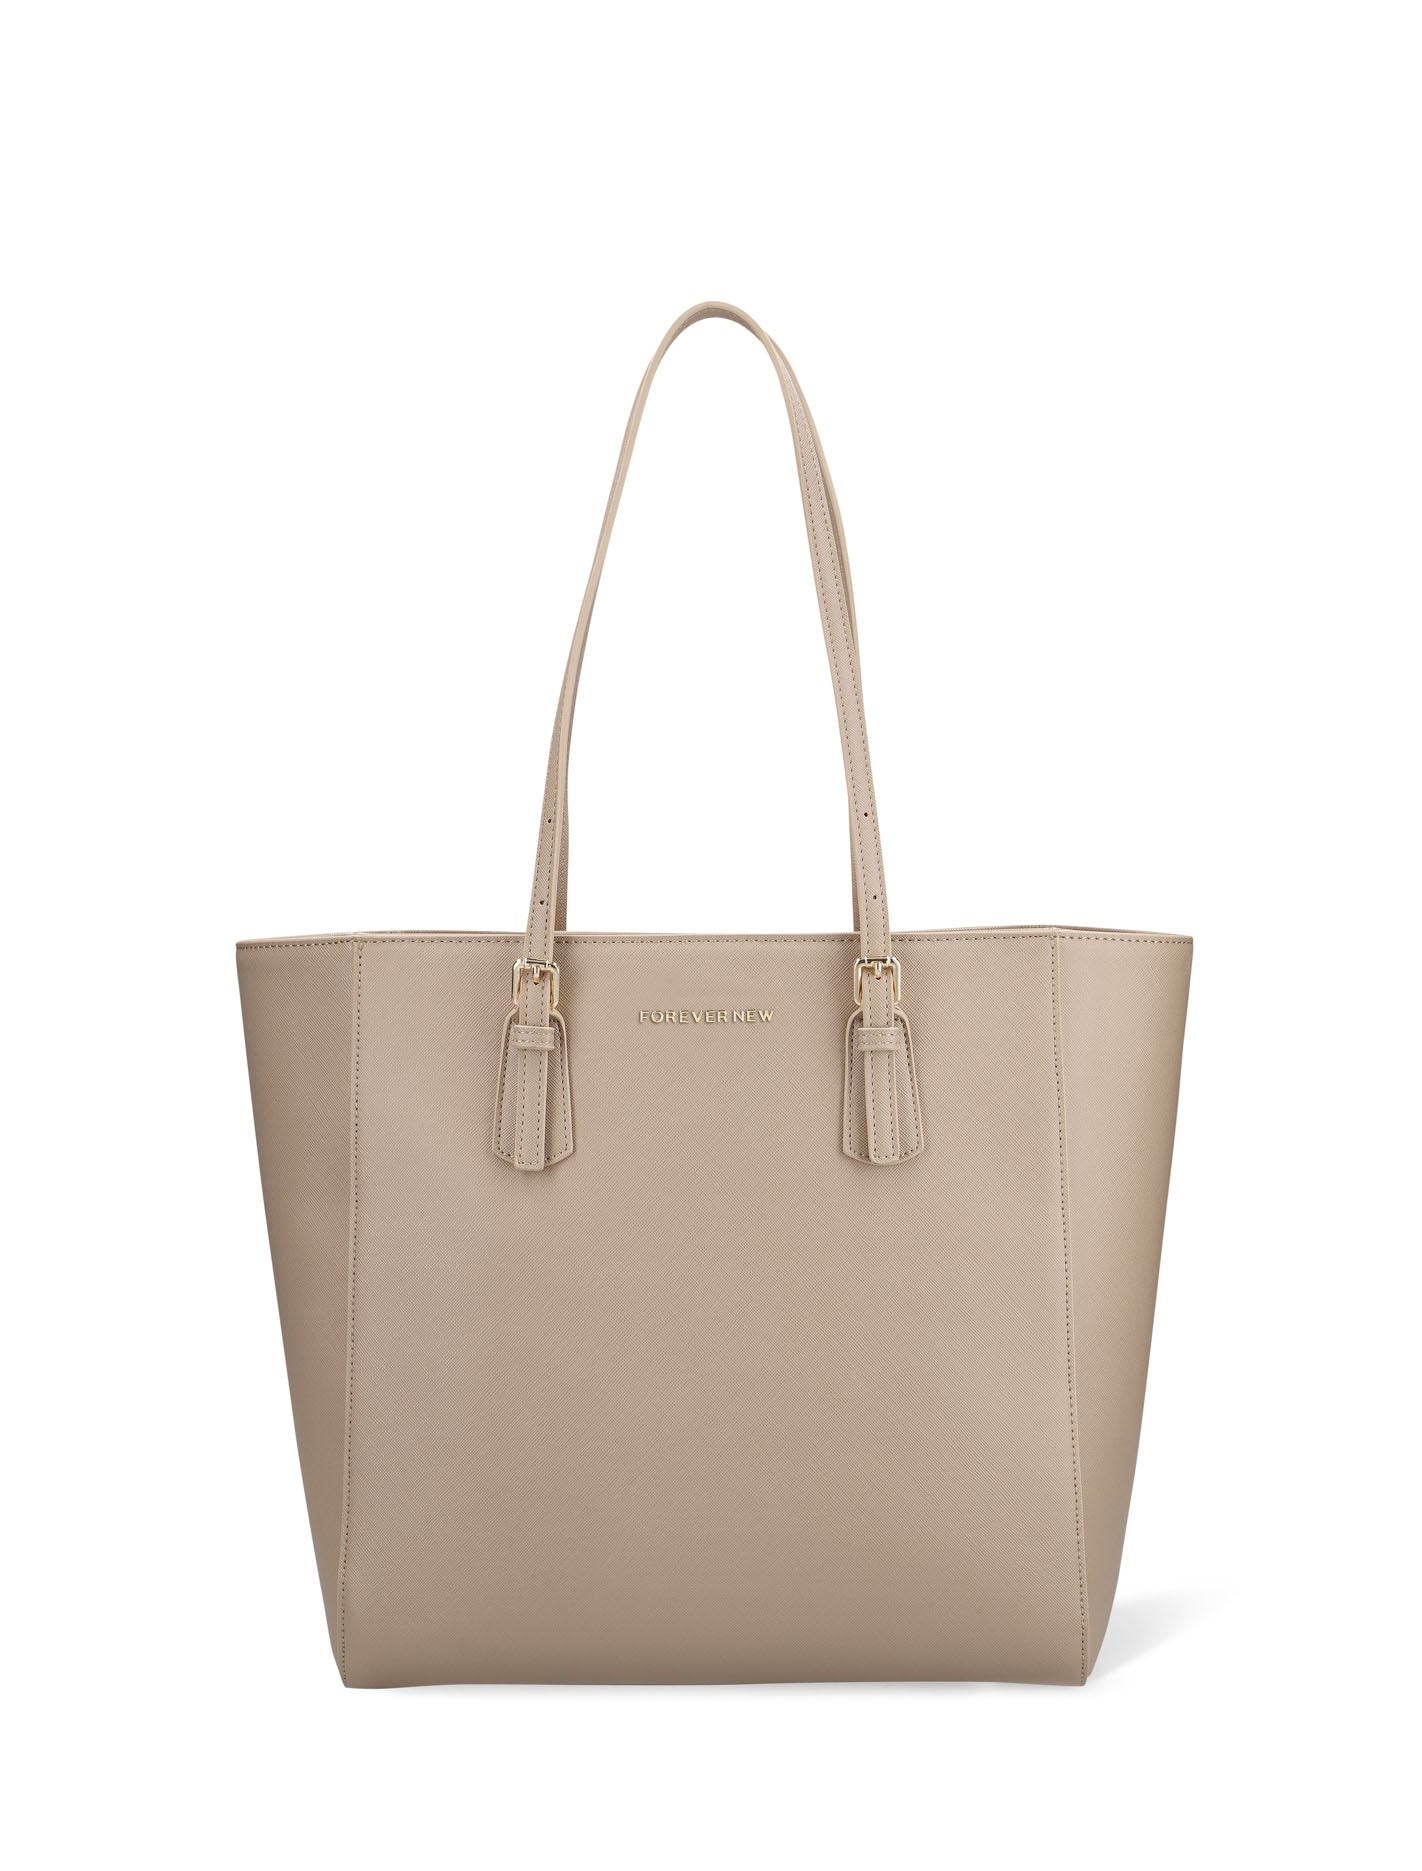 Forever New Bags | Shop Women's Tote Handbags Online